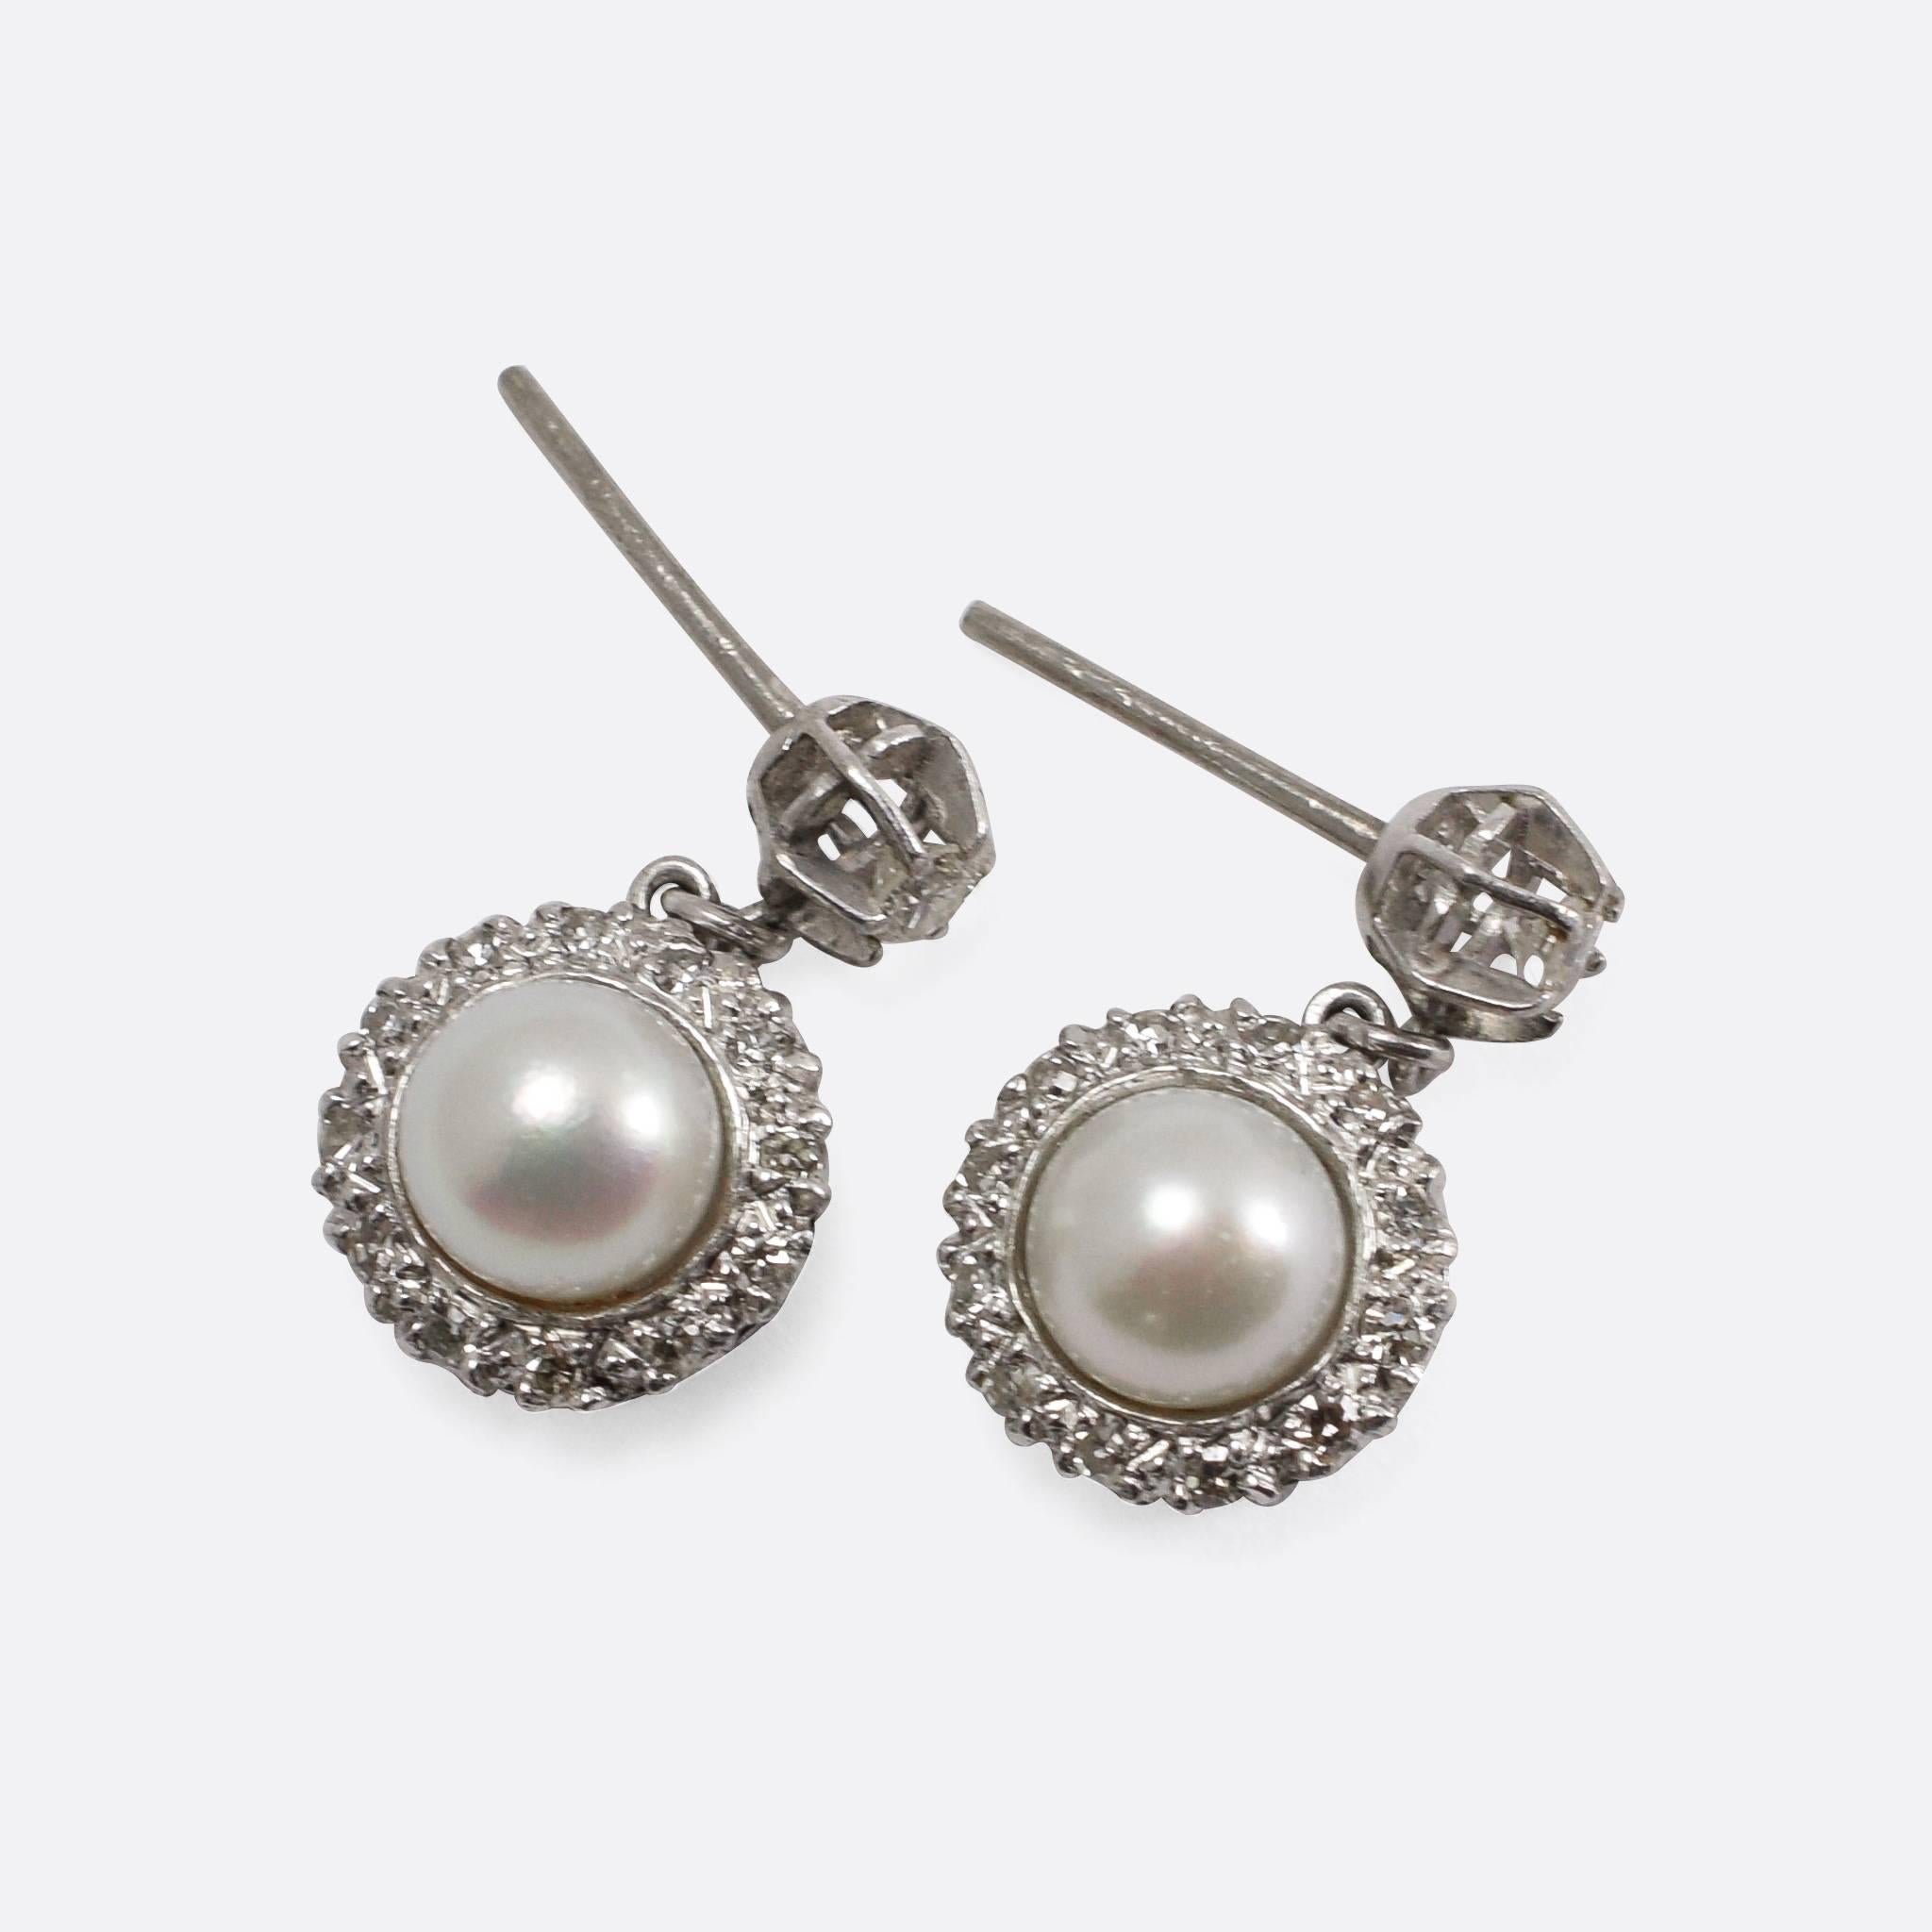 The prettiest pair of stud earrings, with a pearl and diamond cluster drop - sitting beneath a single claw-set diamond. They date to the 1930s, and would make a wonderful wedding accessory. Modelled in platinum throughout.